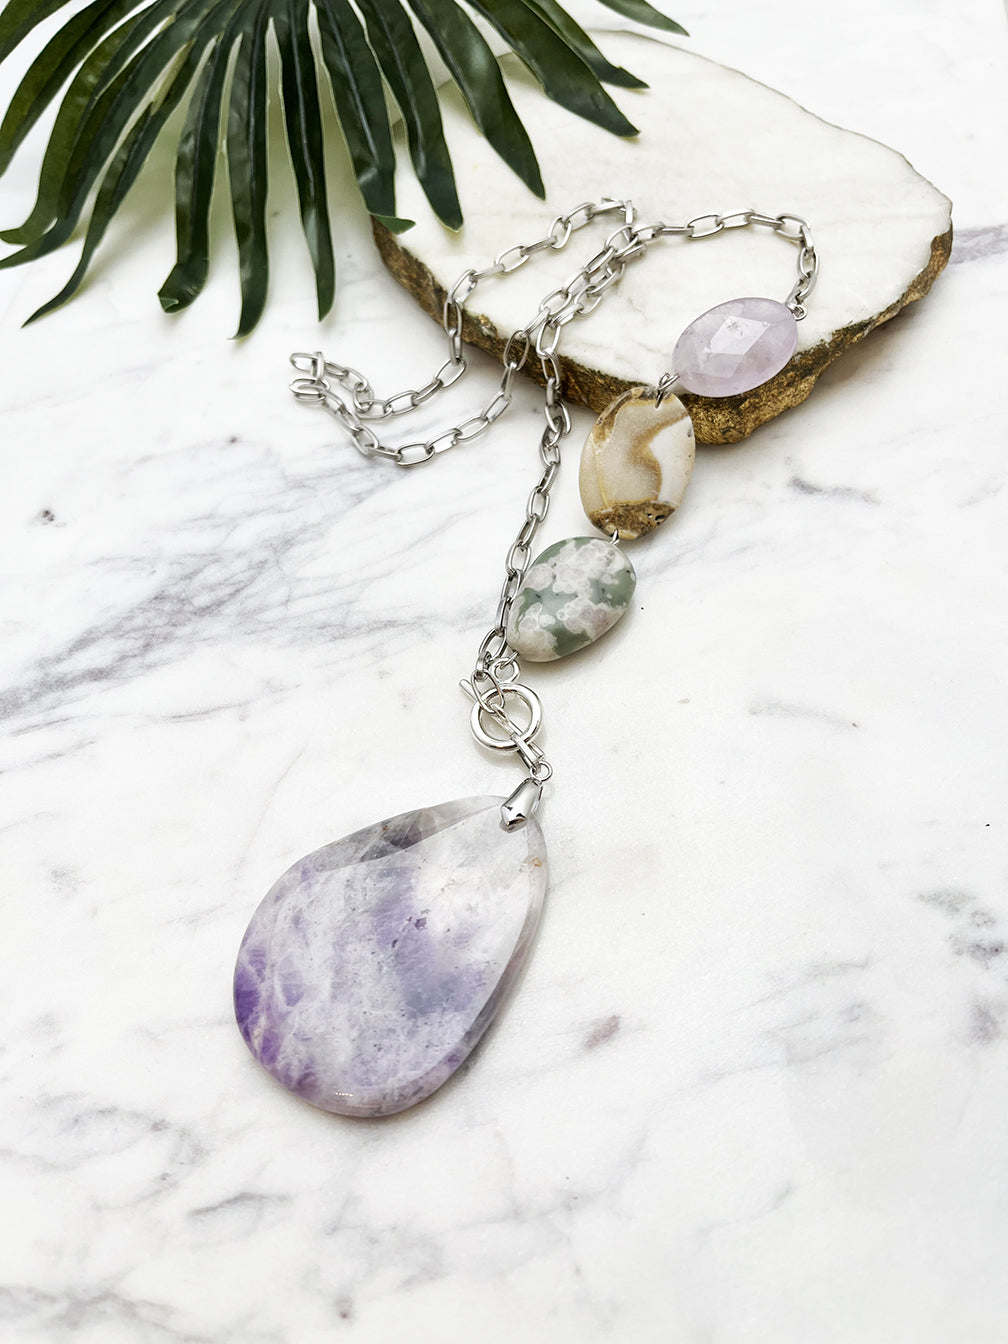 asymmetrical pendant necklace - amethyst and peace stone